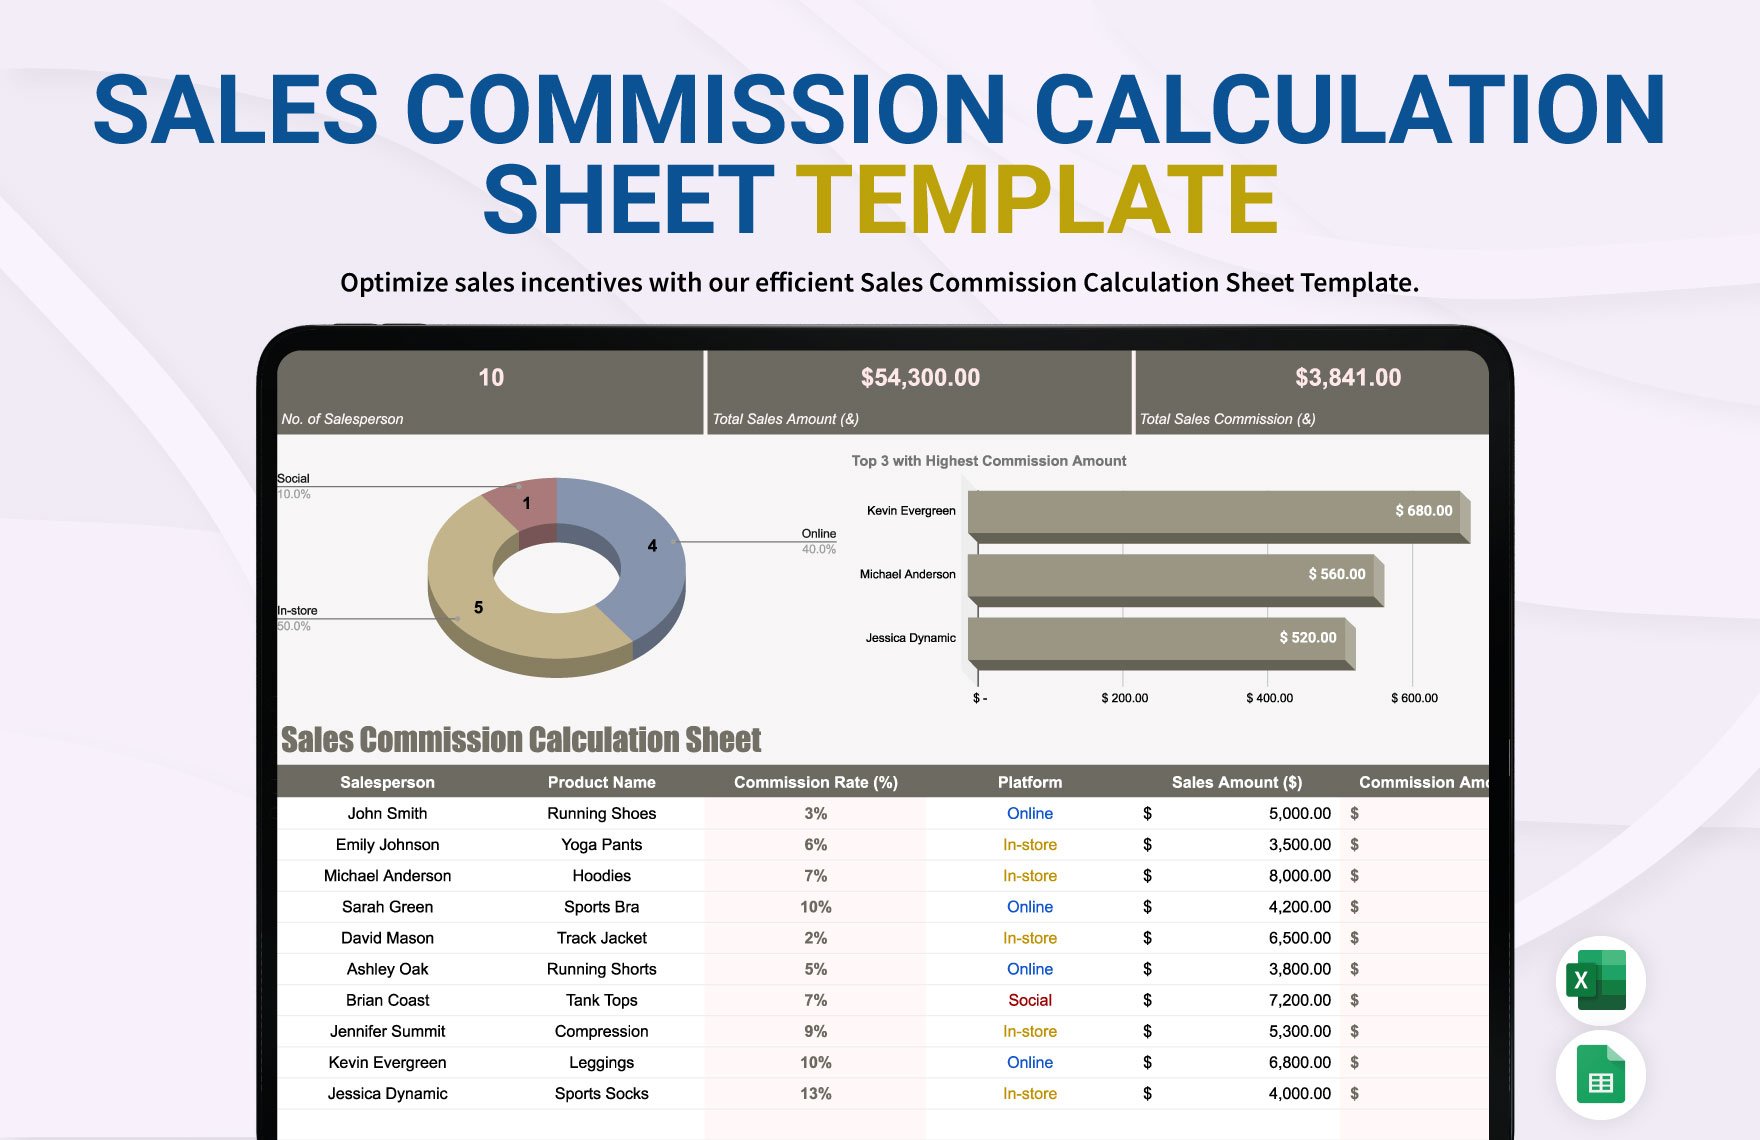 Sales Commission Calculation Sheet Template